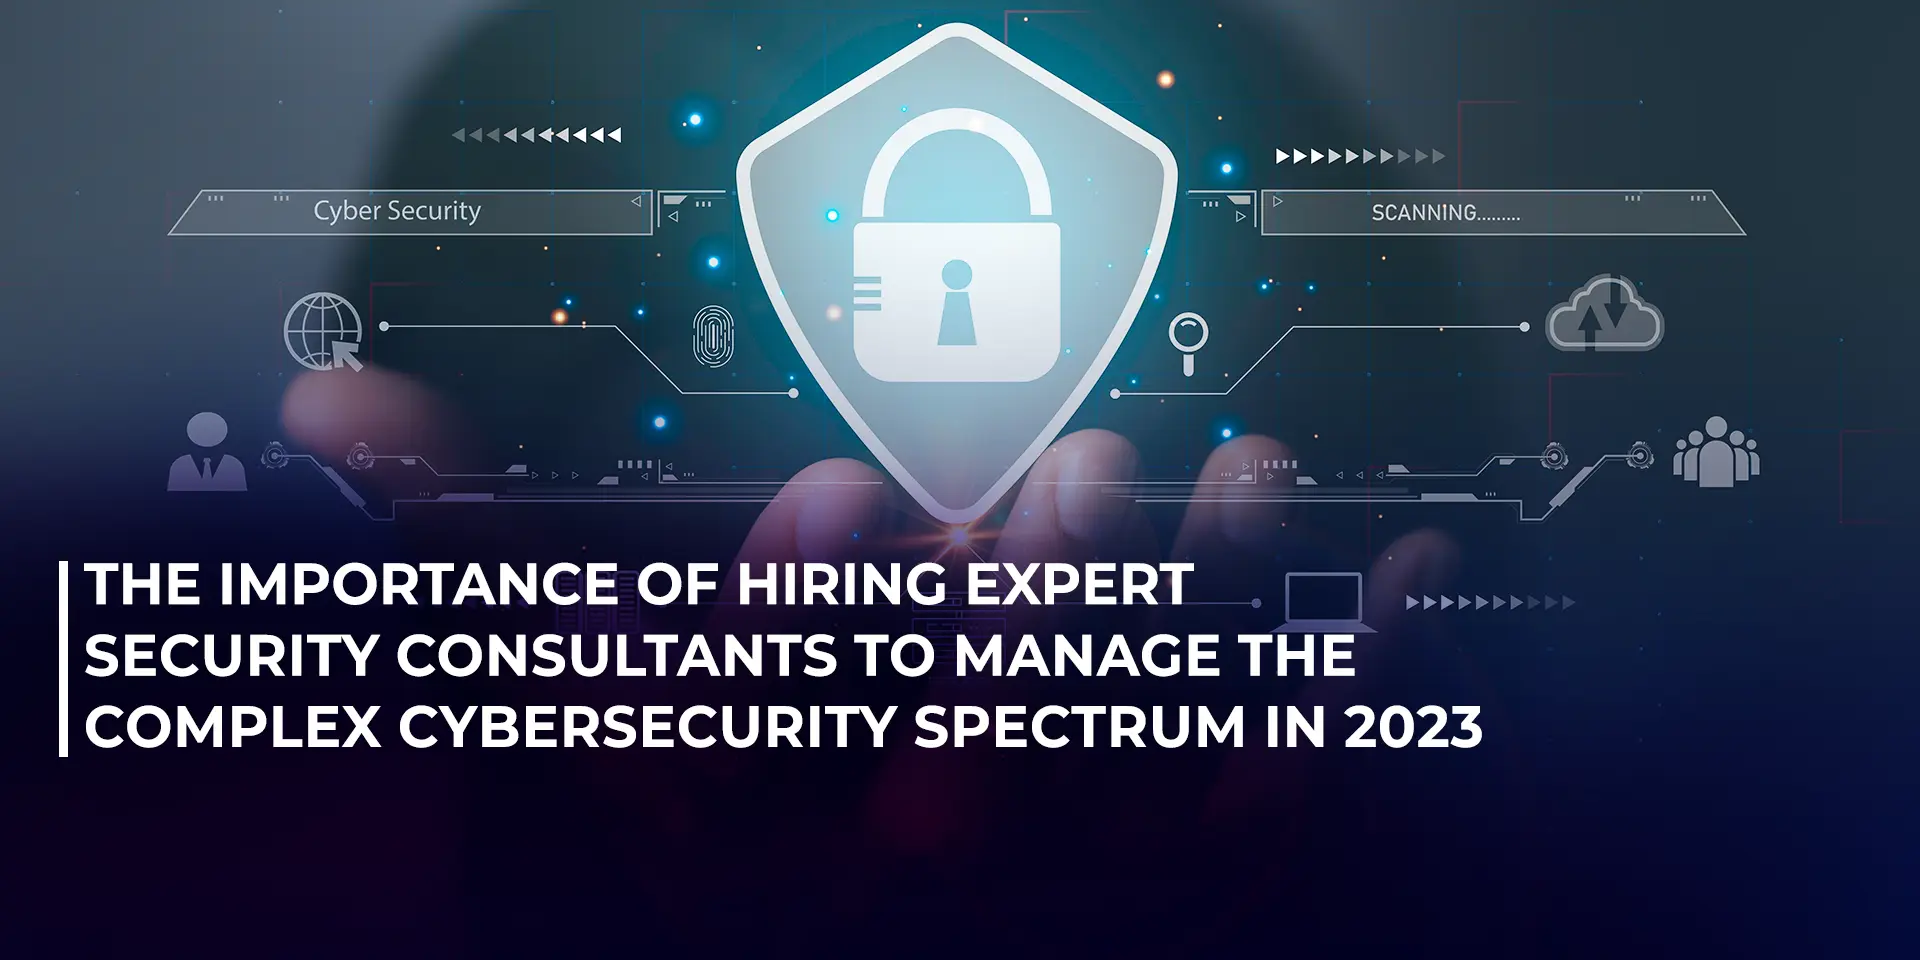 The importance of hiring Expert Security Consultants to manage the complex cybersecurity spectrum in 2023